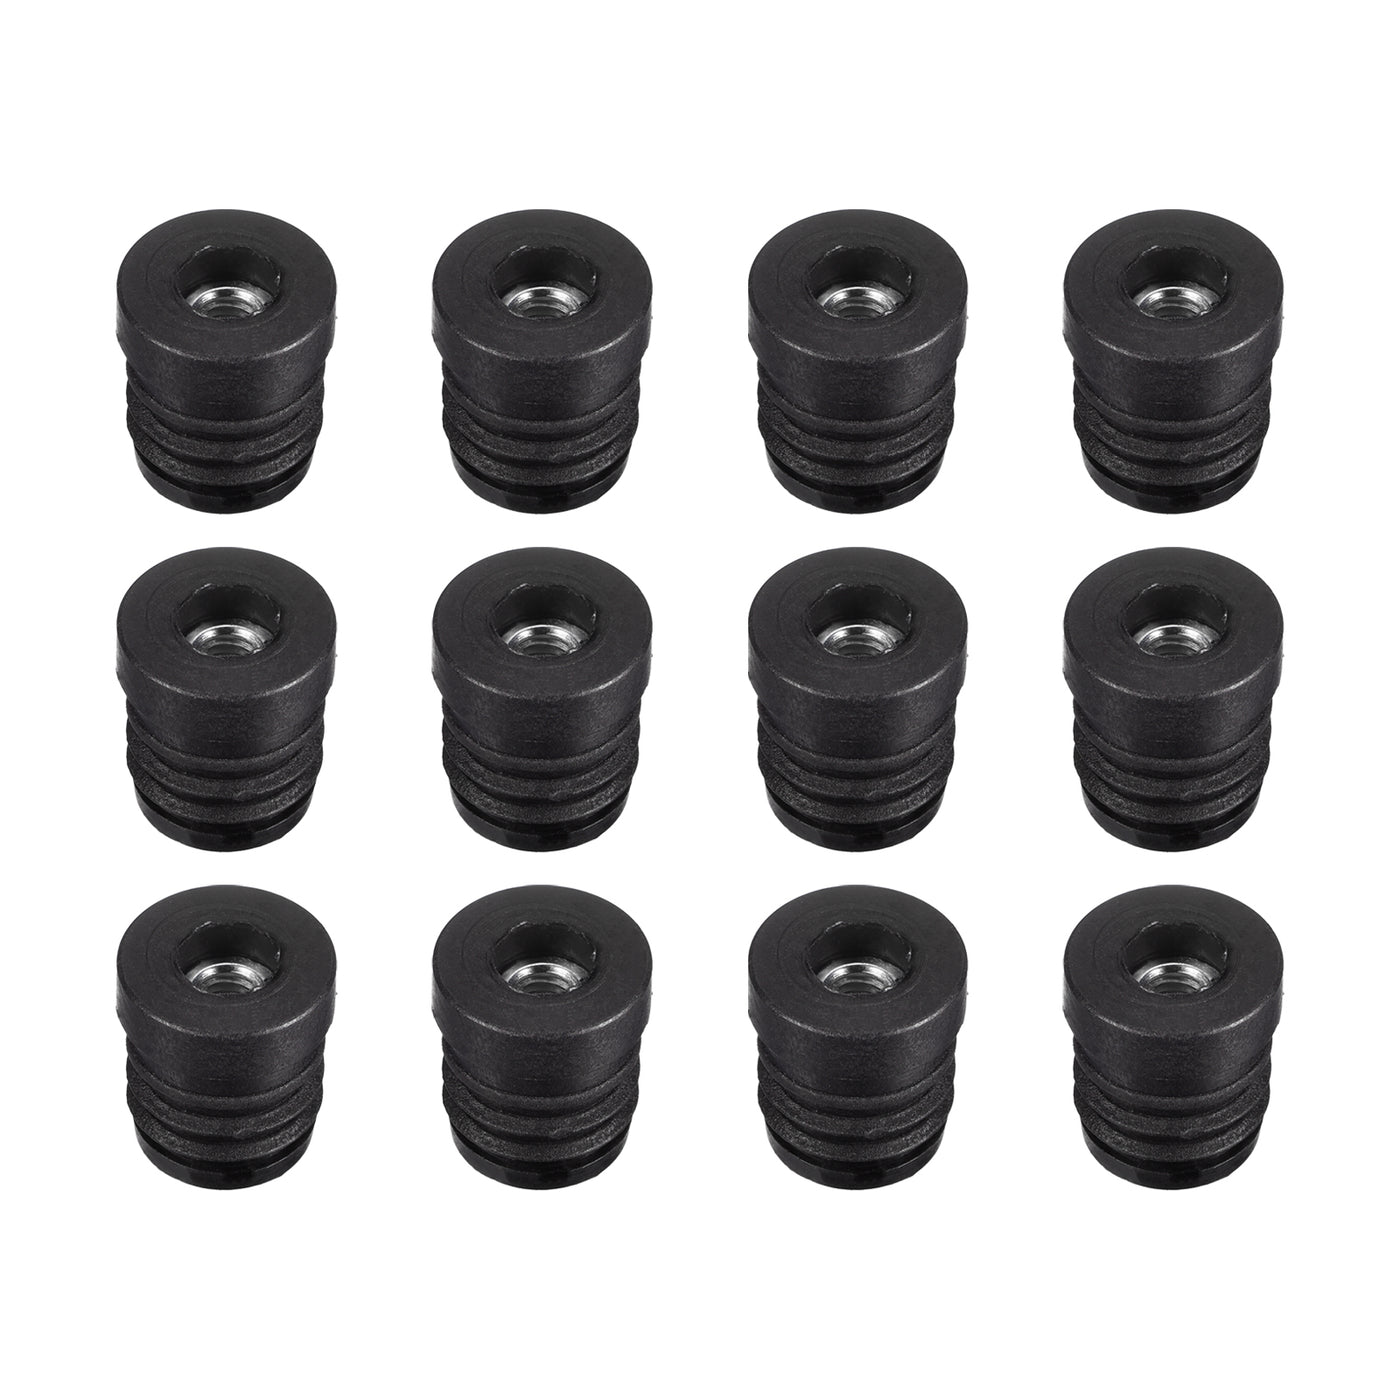 uxcell Uxcell 12Pcs 19mm/0.75" Caster Insert with Thread, Round M6 Thread for Furniture